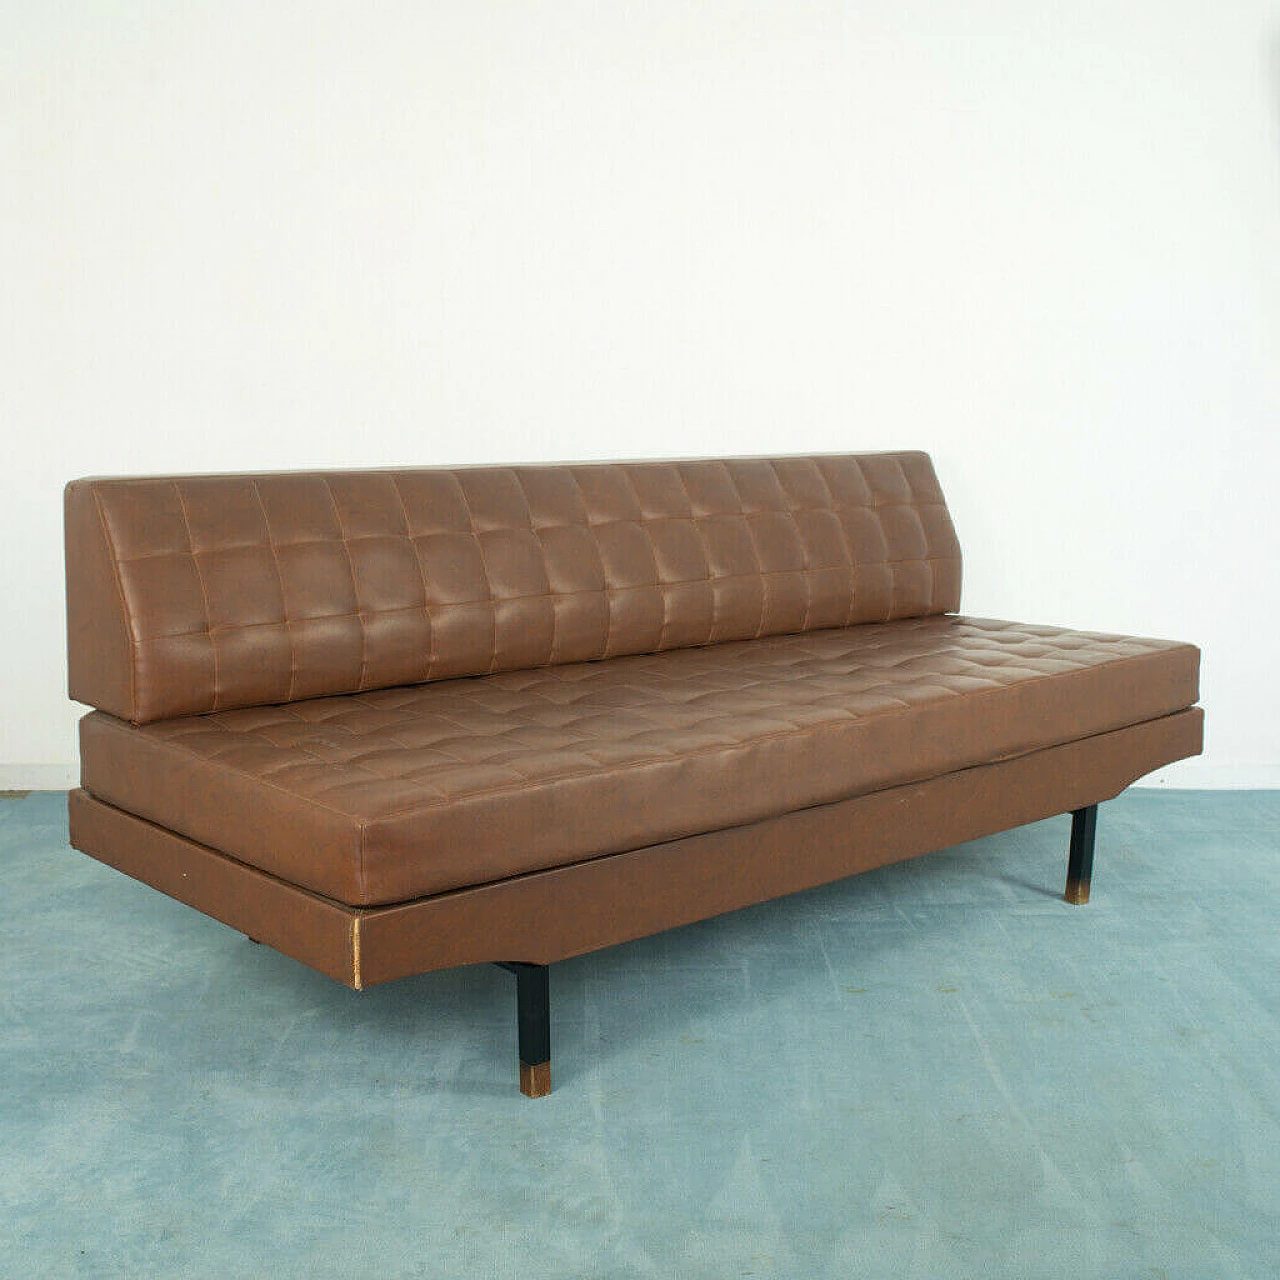 3-Seater sofa or daybed by Marco Zanuso for Flexform, 1950s 1183329